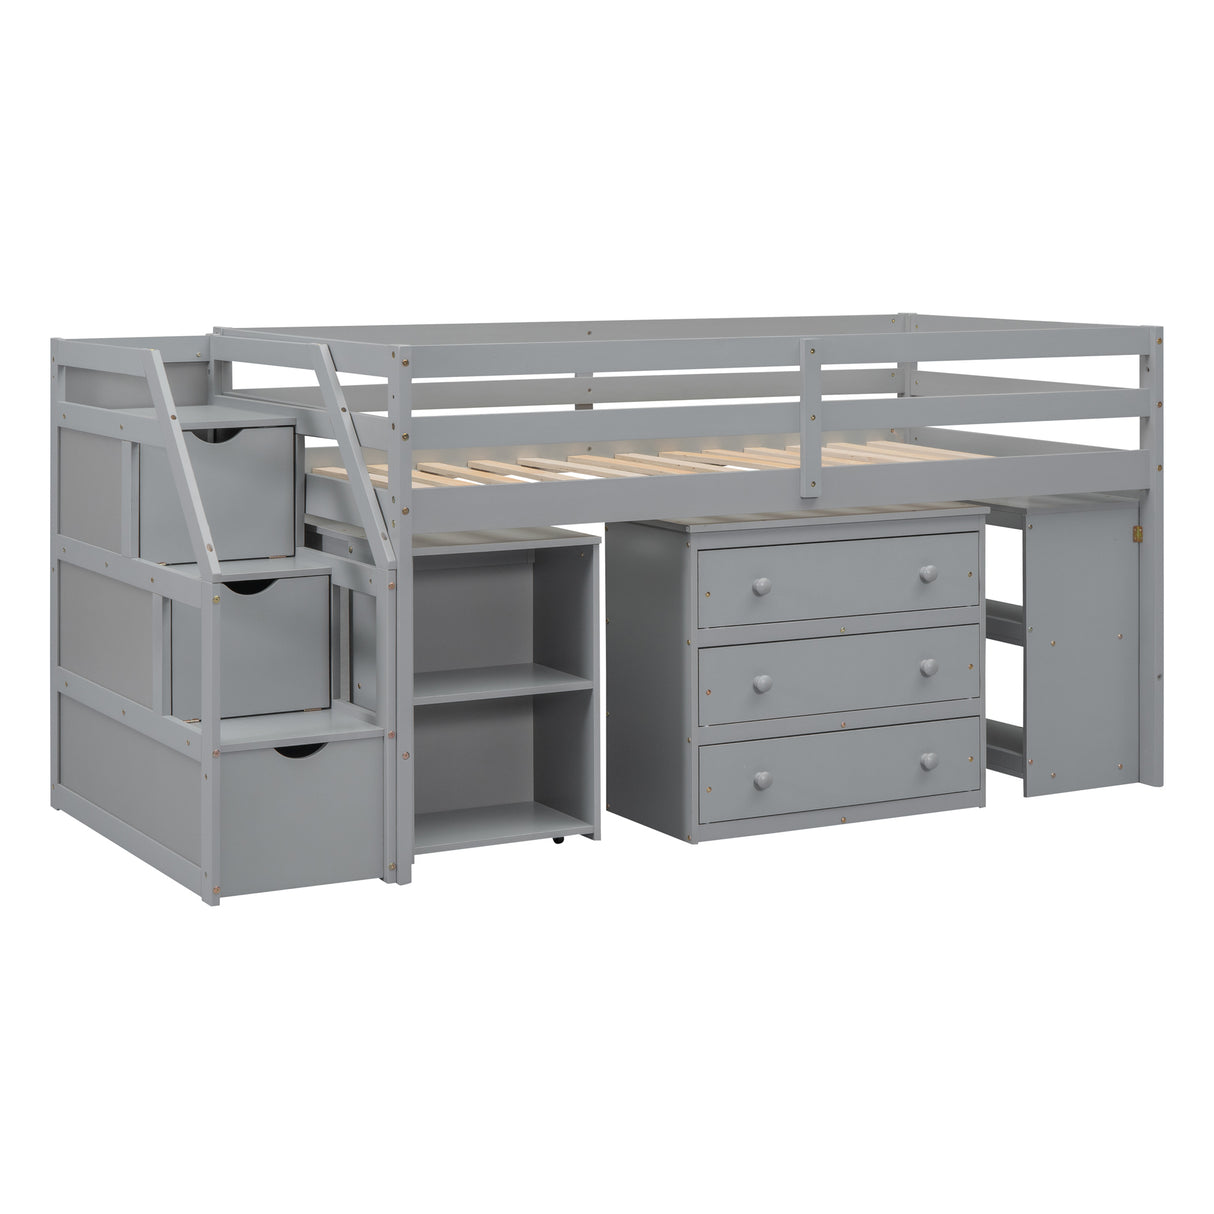 Twin Size Loft Bed with Retractable Writing Desk and 3 Drawers, Wooden Loft Bed with Storage Stairs and Shelves, Gray - Home Elegance USA